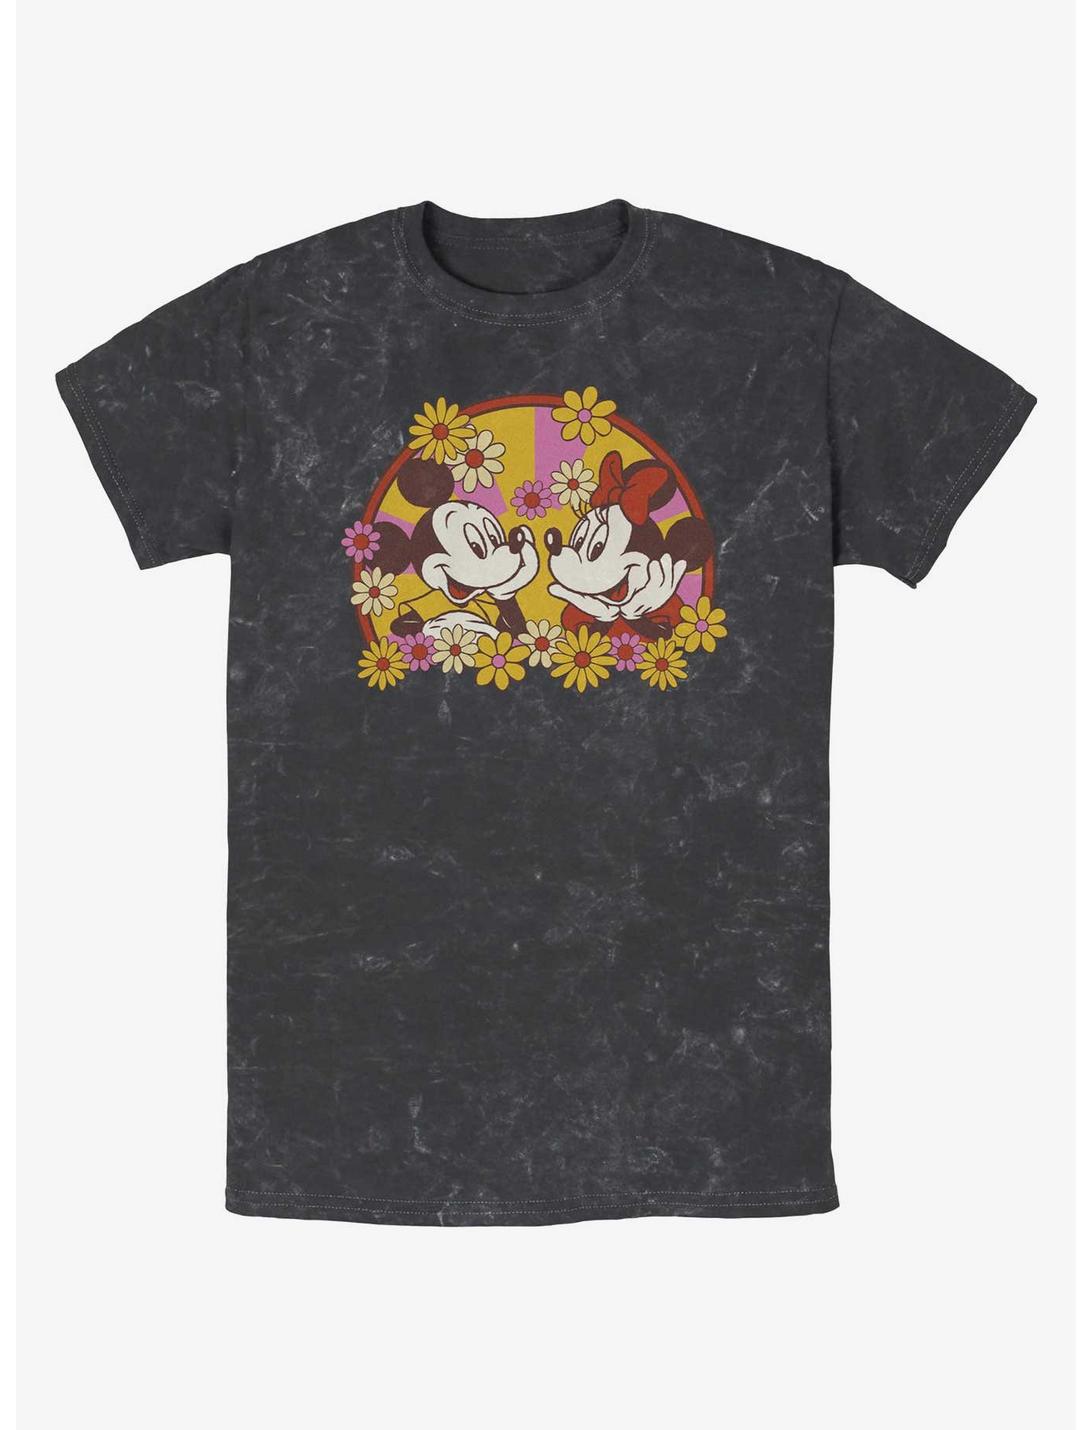 Disney Mickey Mouse Mickey & Minnie Spring Bloom Mineral Wash T-Shirt, BLACK, hi-res